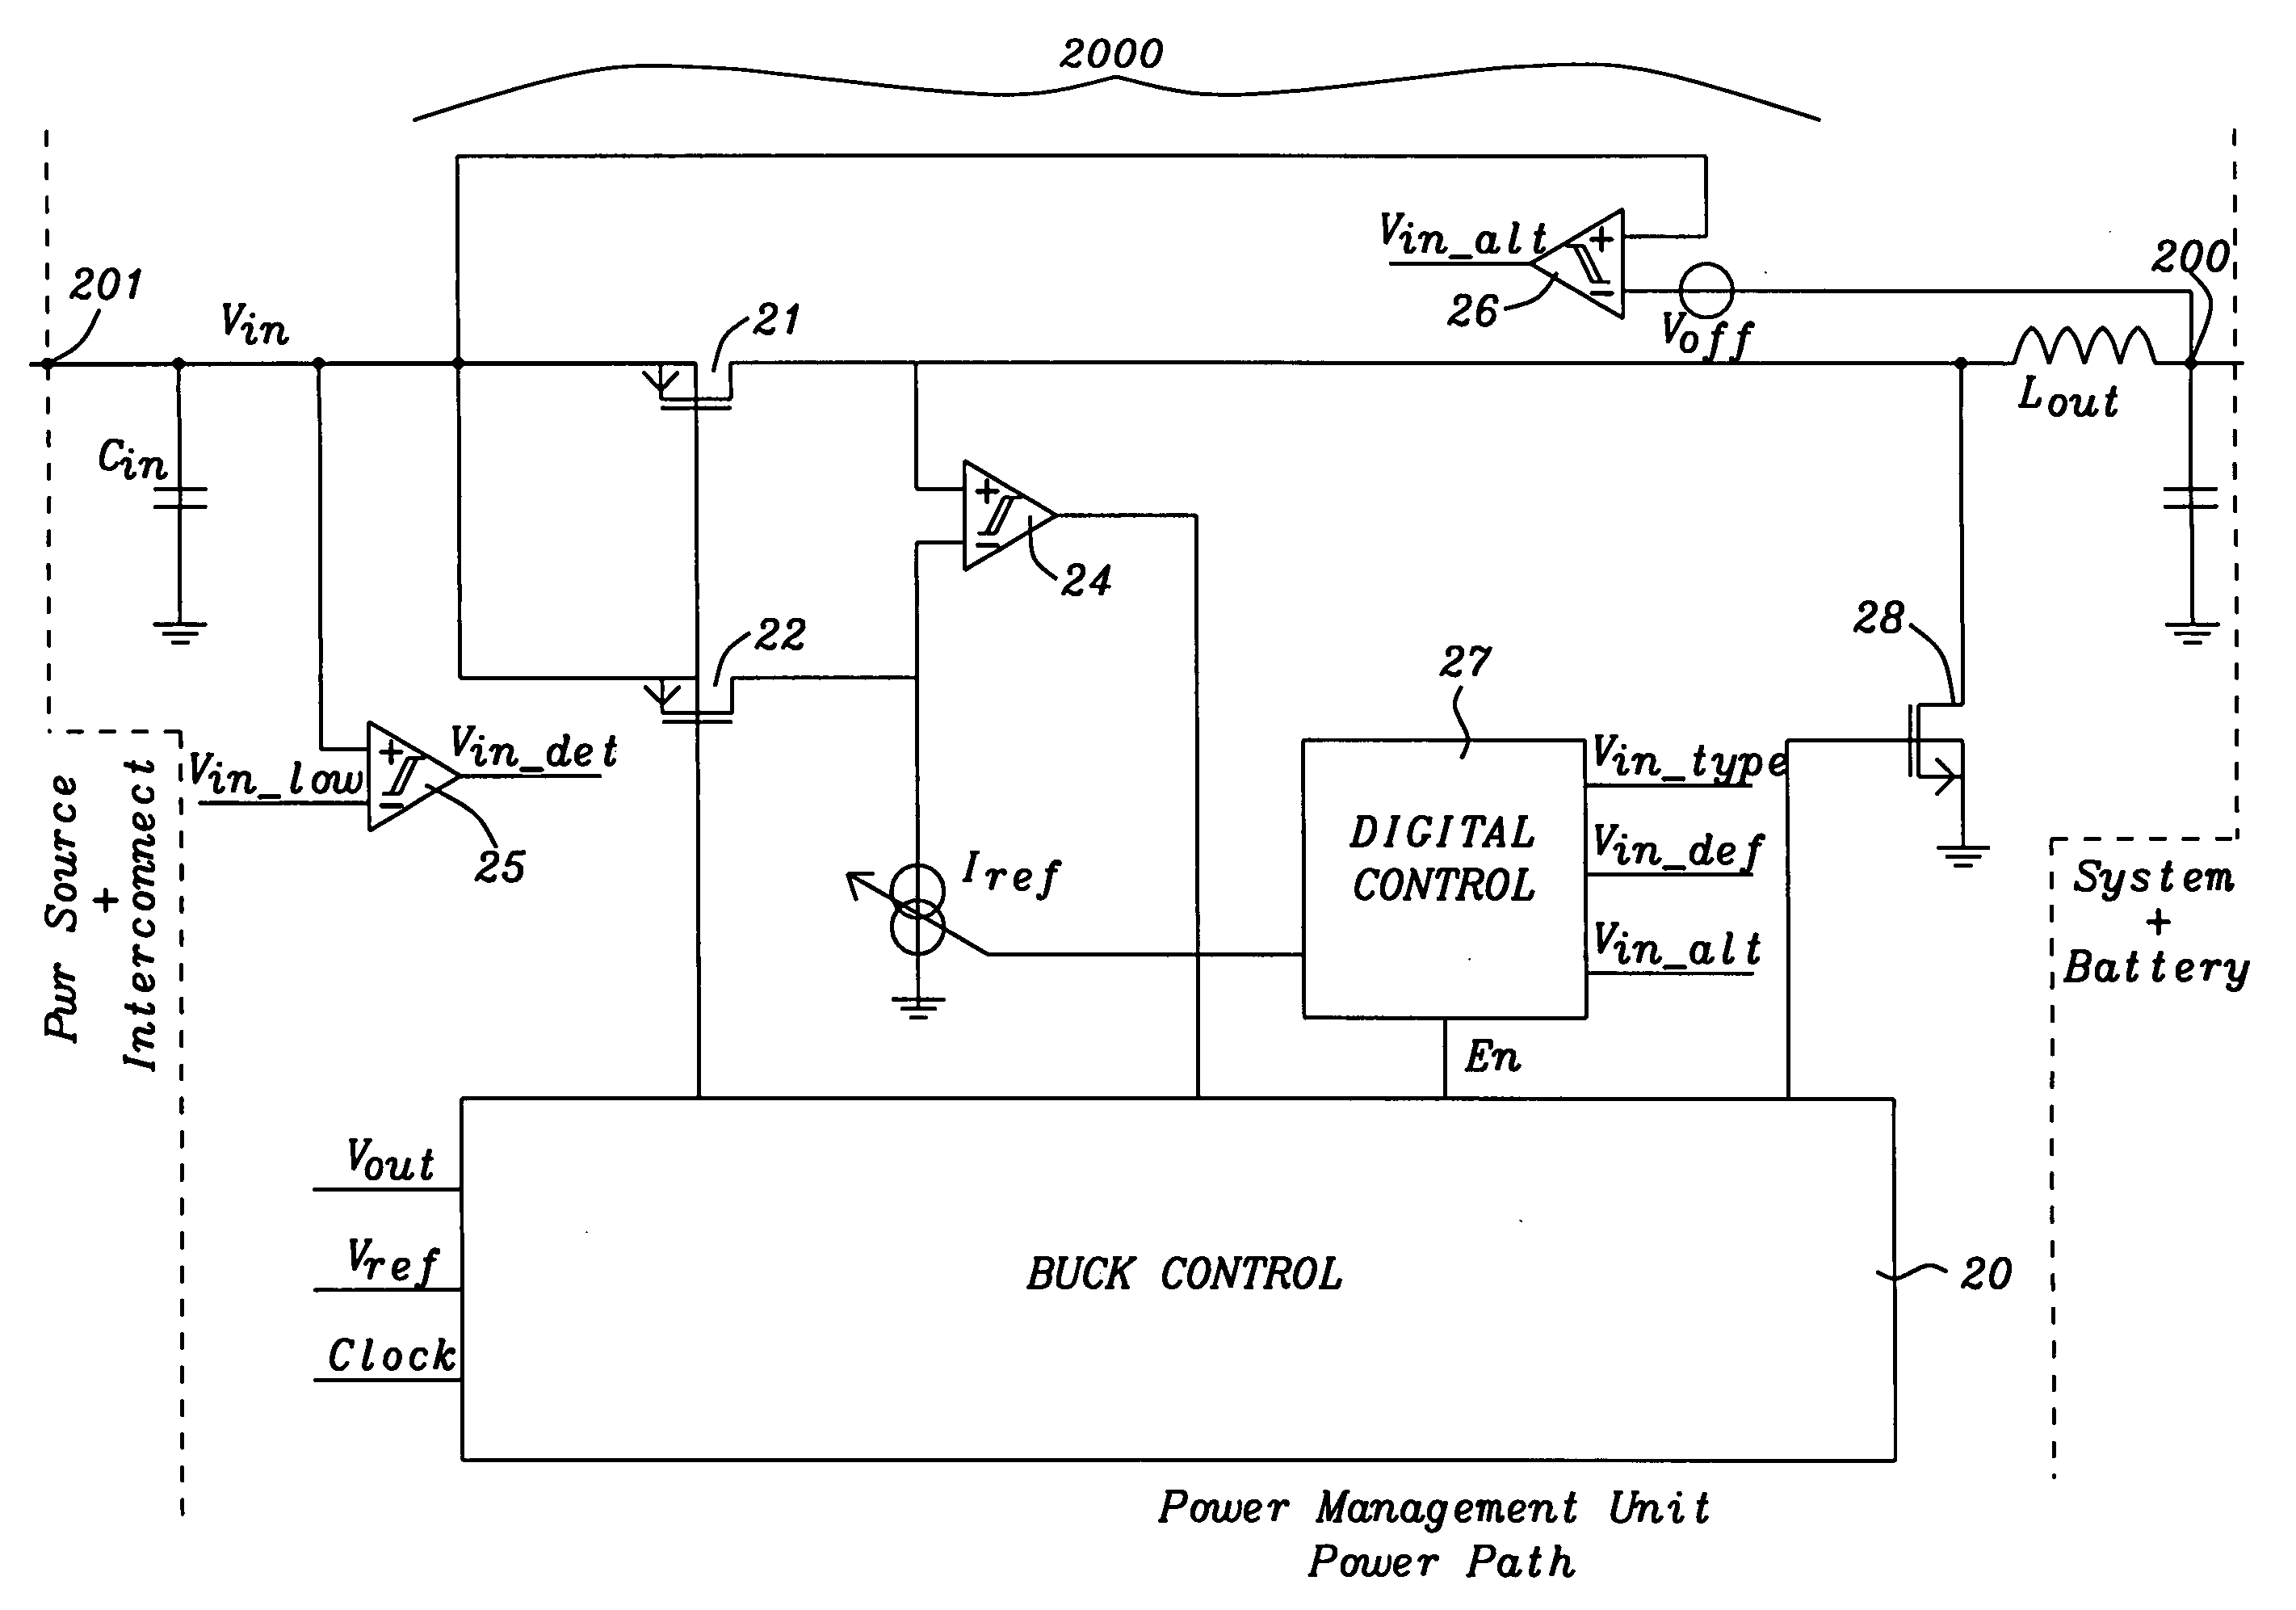 Automatic current limit adjustment for linear and switching regulators